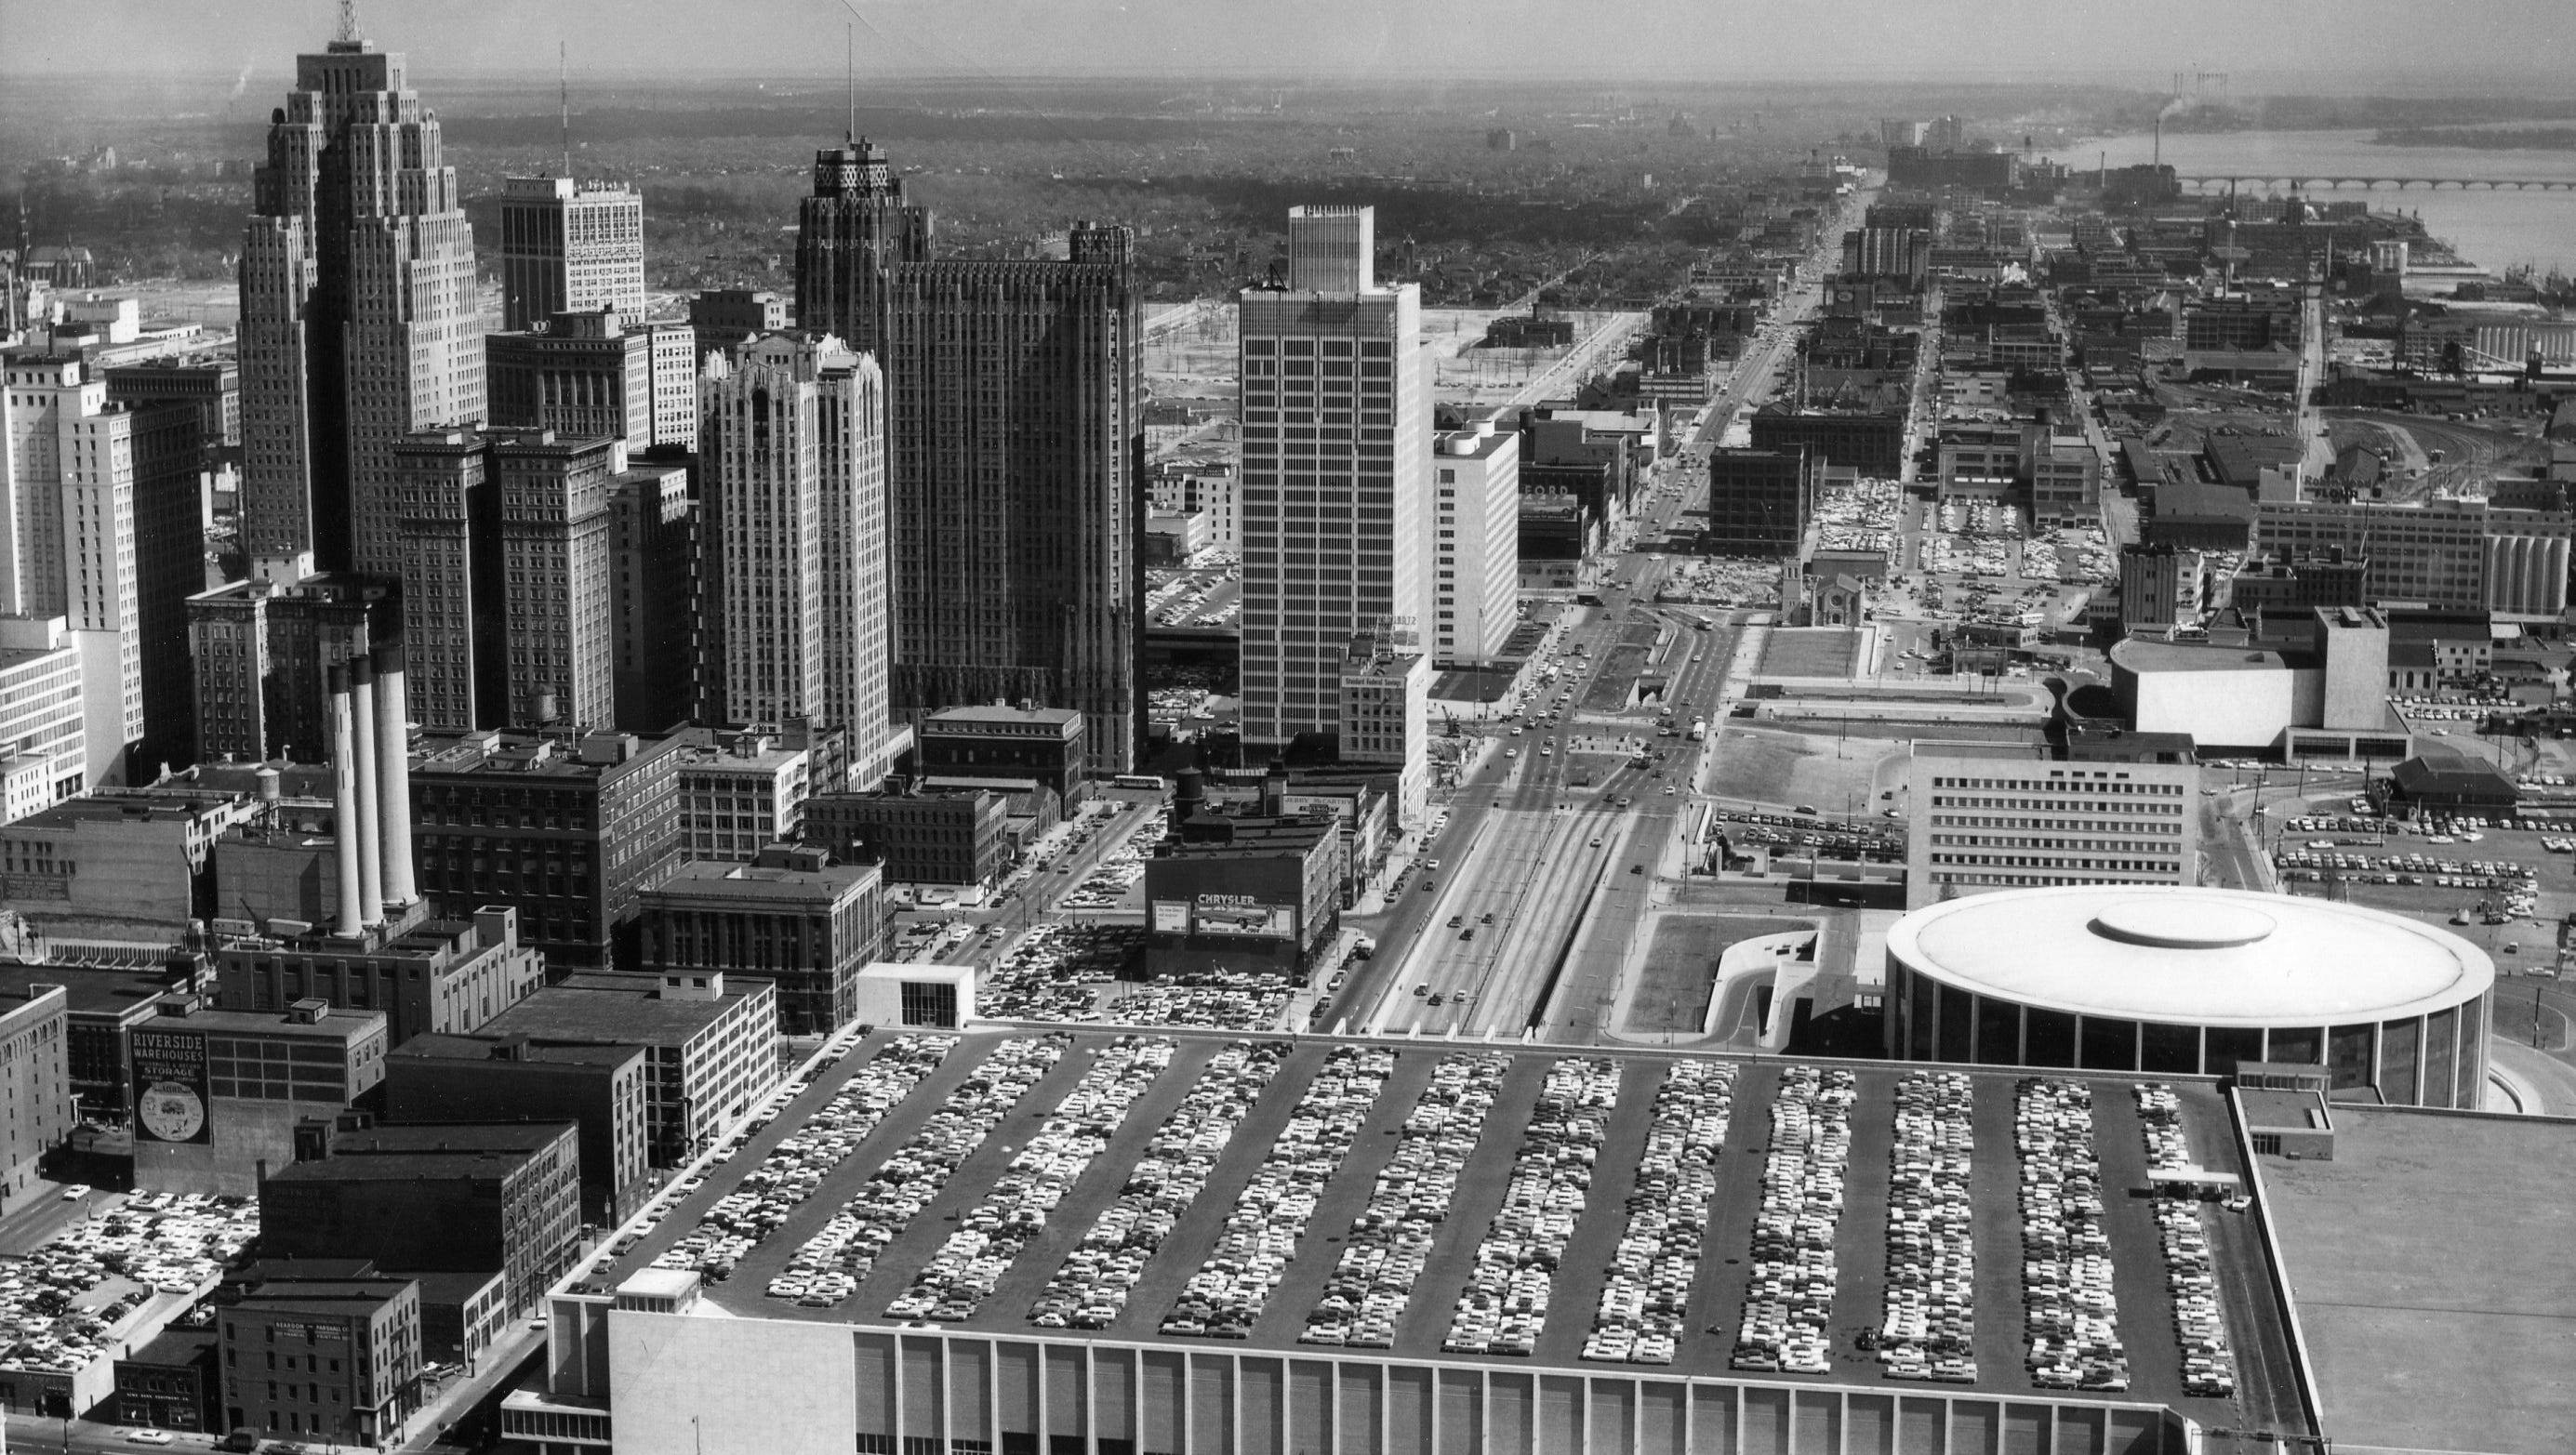 Cobo Conference and Exhibition Center has dominated the heart of downtown Detroit since it opened in 1960. It was built by the city of Detroit and named in honor of former Detroit Mayor Albert Cobo (1950-1957). It is shown here May 20, 1962.